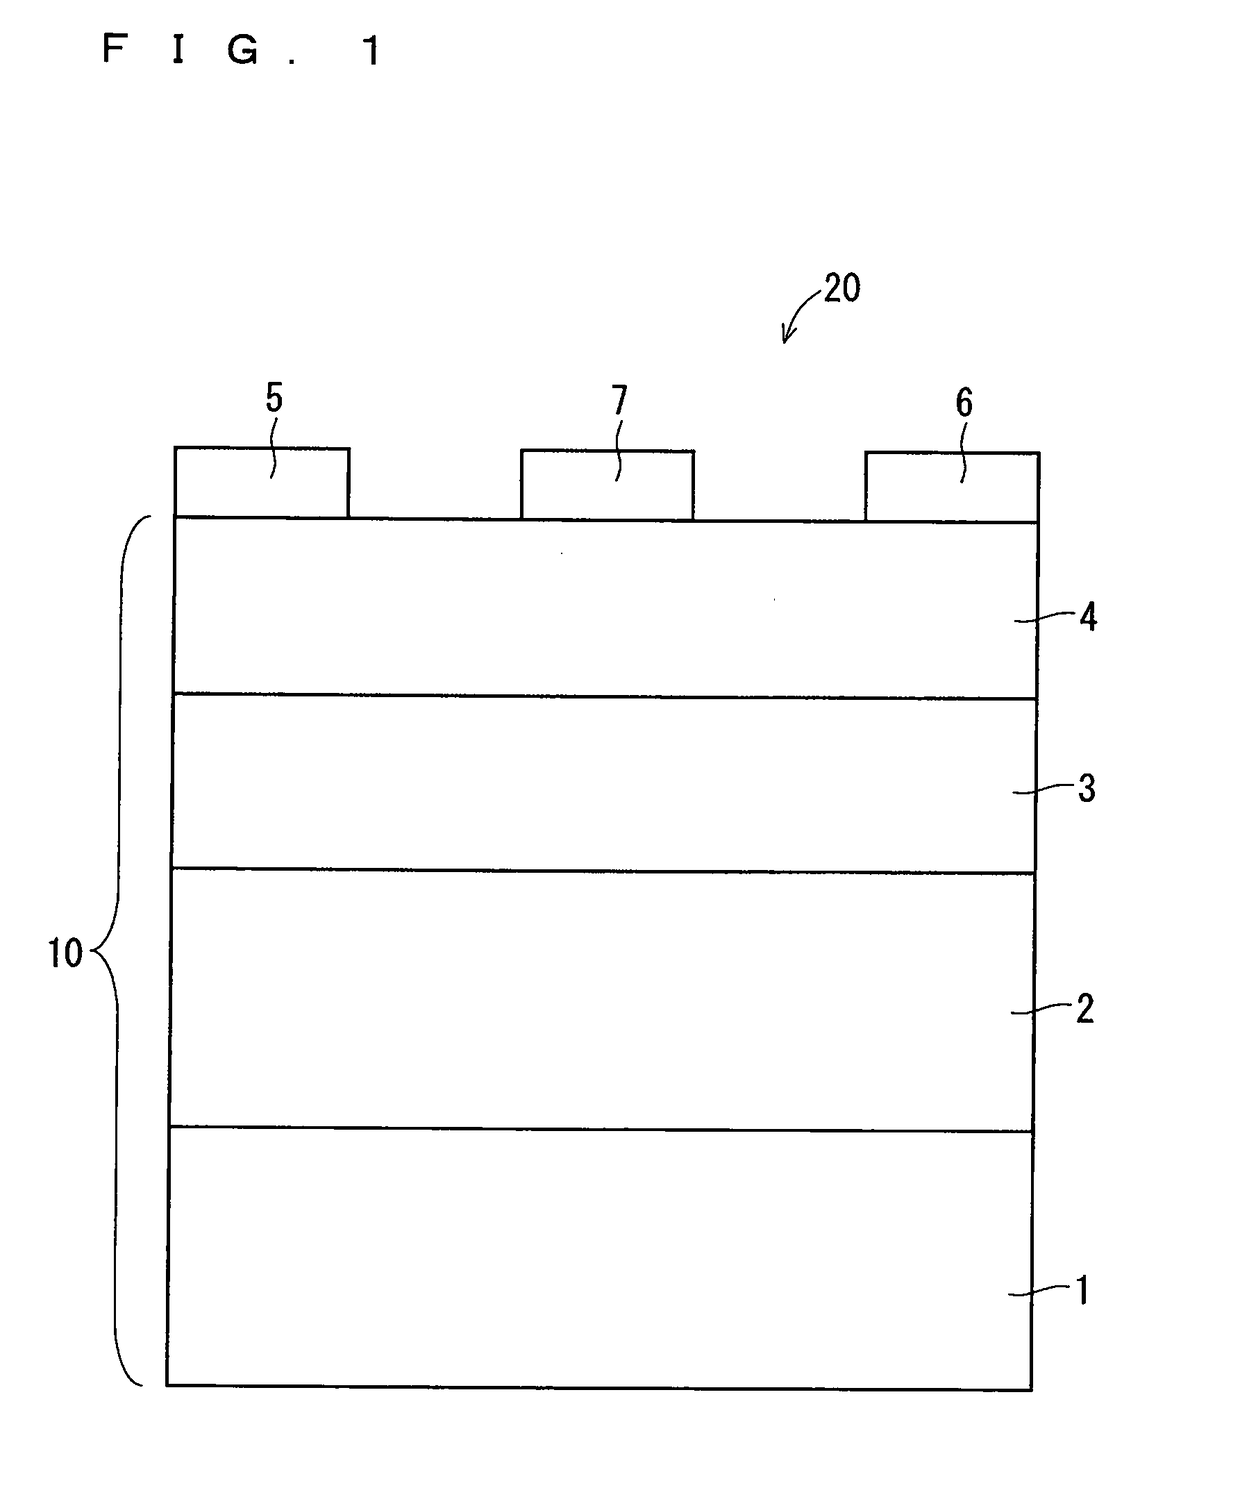 Epitaxial substrate for semiconductor elements, semiconductor element, and manufacturing method for epitaxial substrates for semiconductor elements